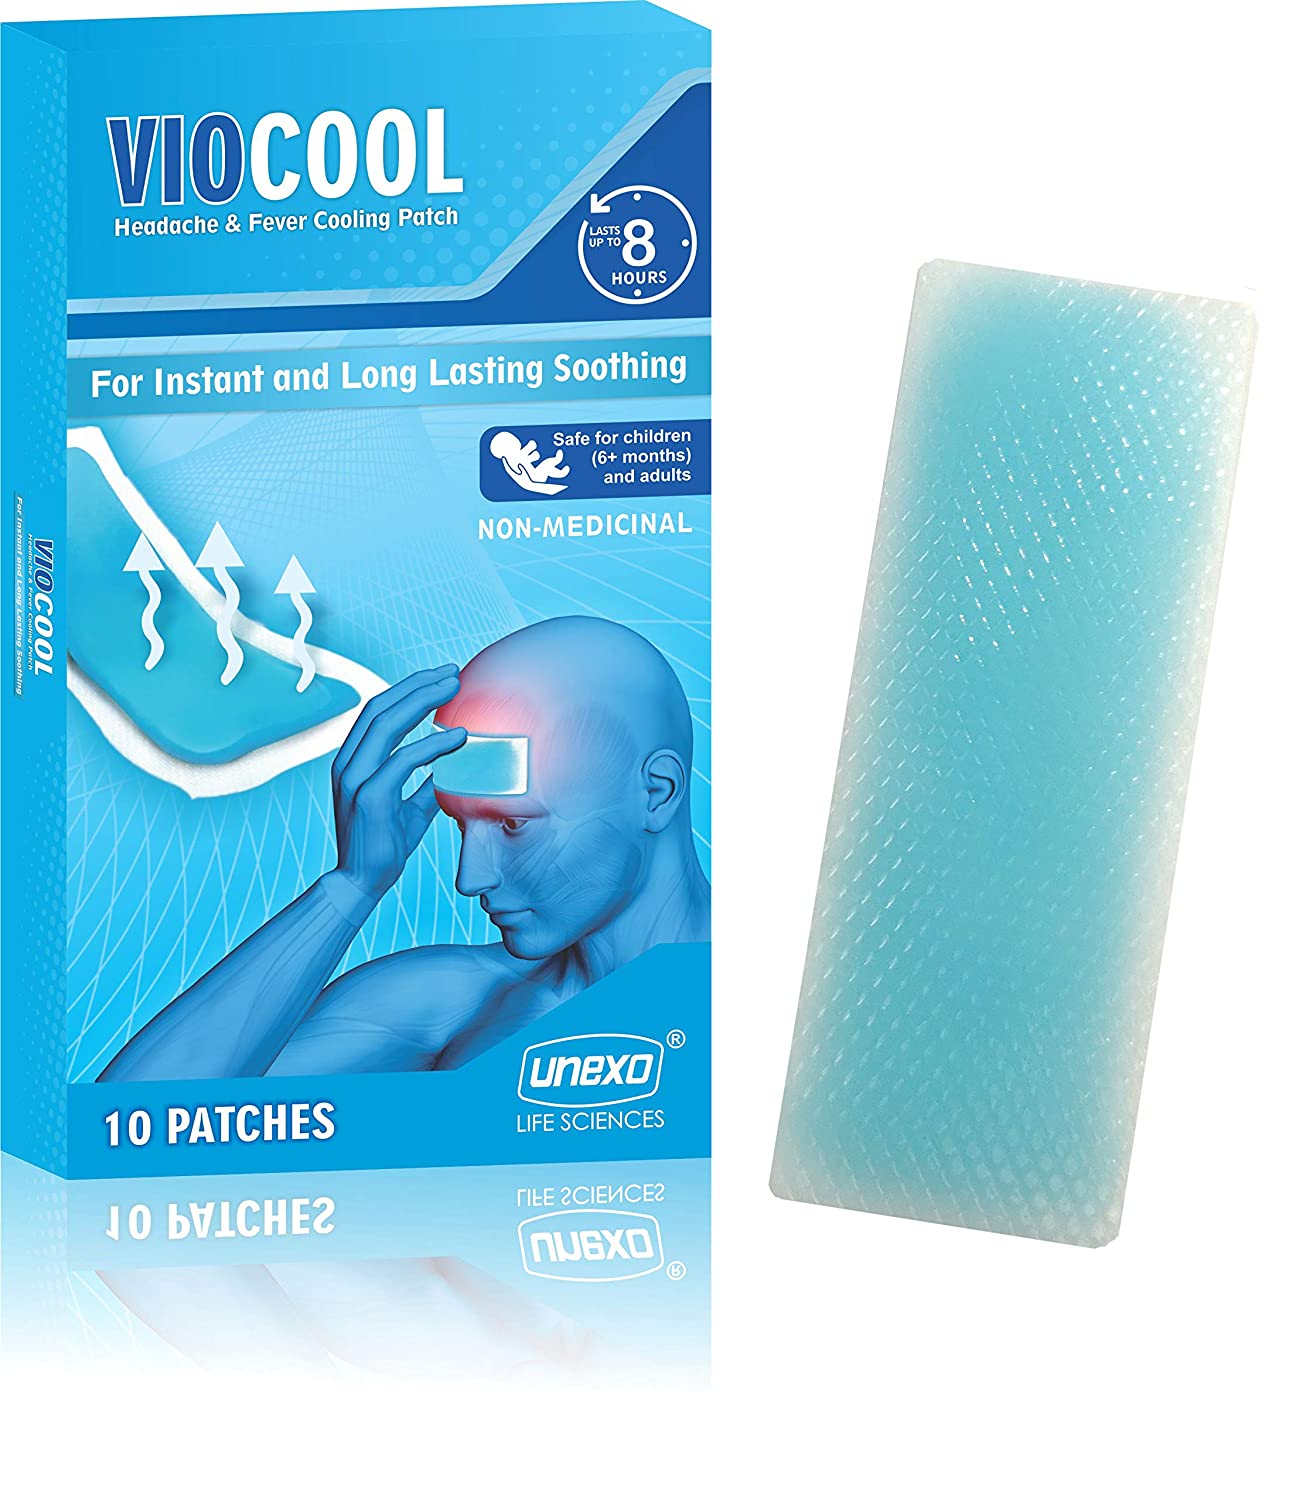 Viocool - Headache and Fever Cooling Patch